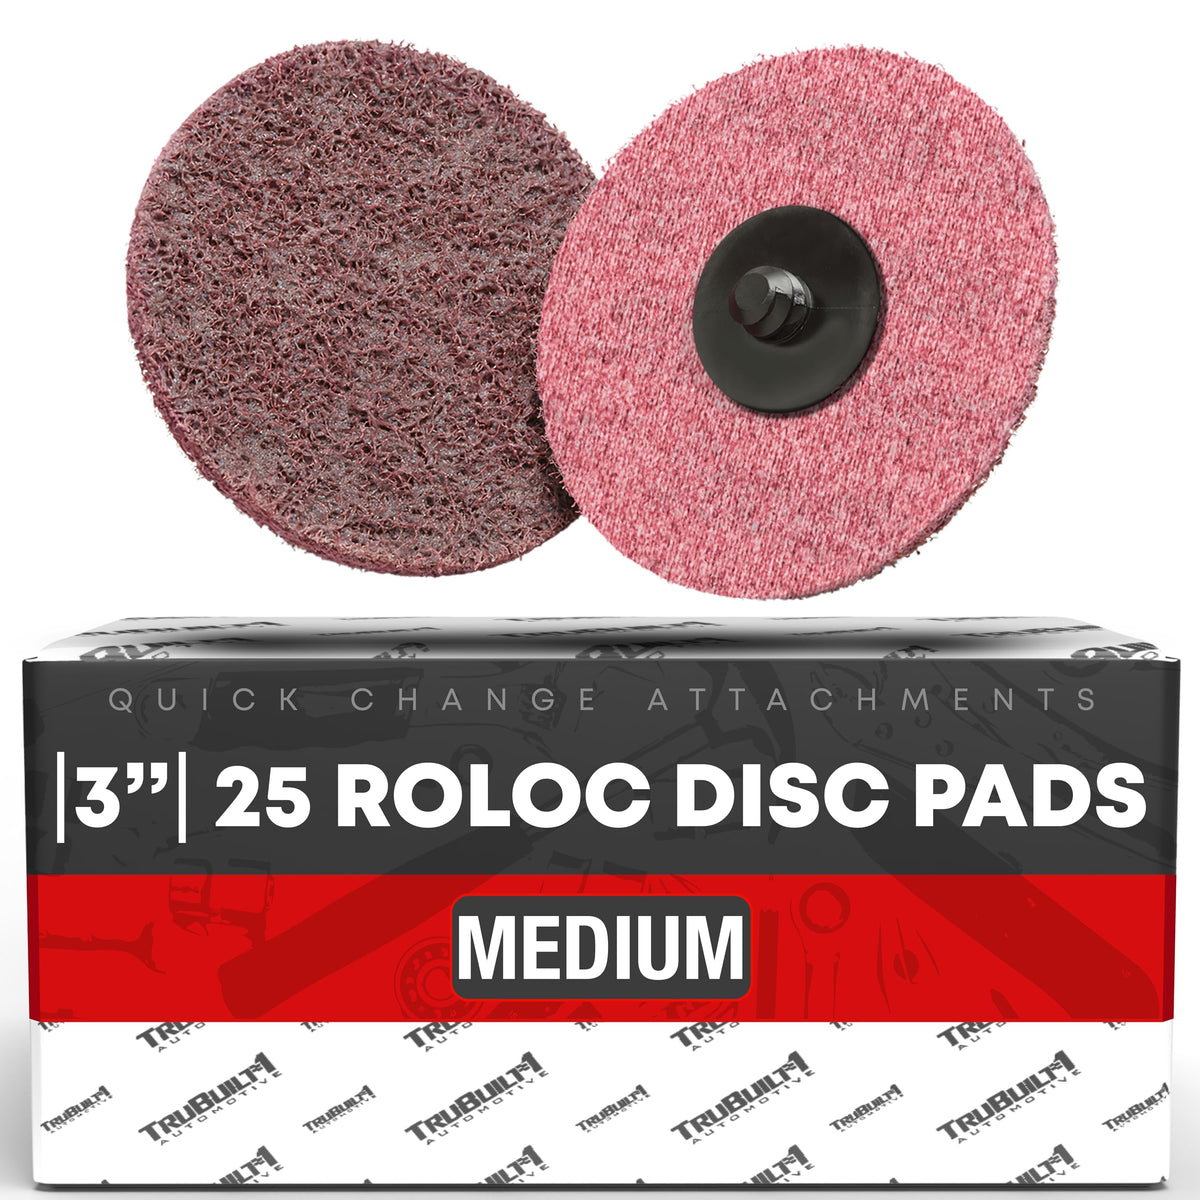 2 Inch Roll Lock Disc Sanding Quick Change Discs Holder Surface Conditioning Disc,Type "R" | 25PCS Grinding Disks Rust Remover, Die for Metal| Compatible with 3M Sanding Discs or Scotch Brite Sponge